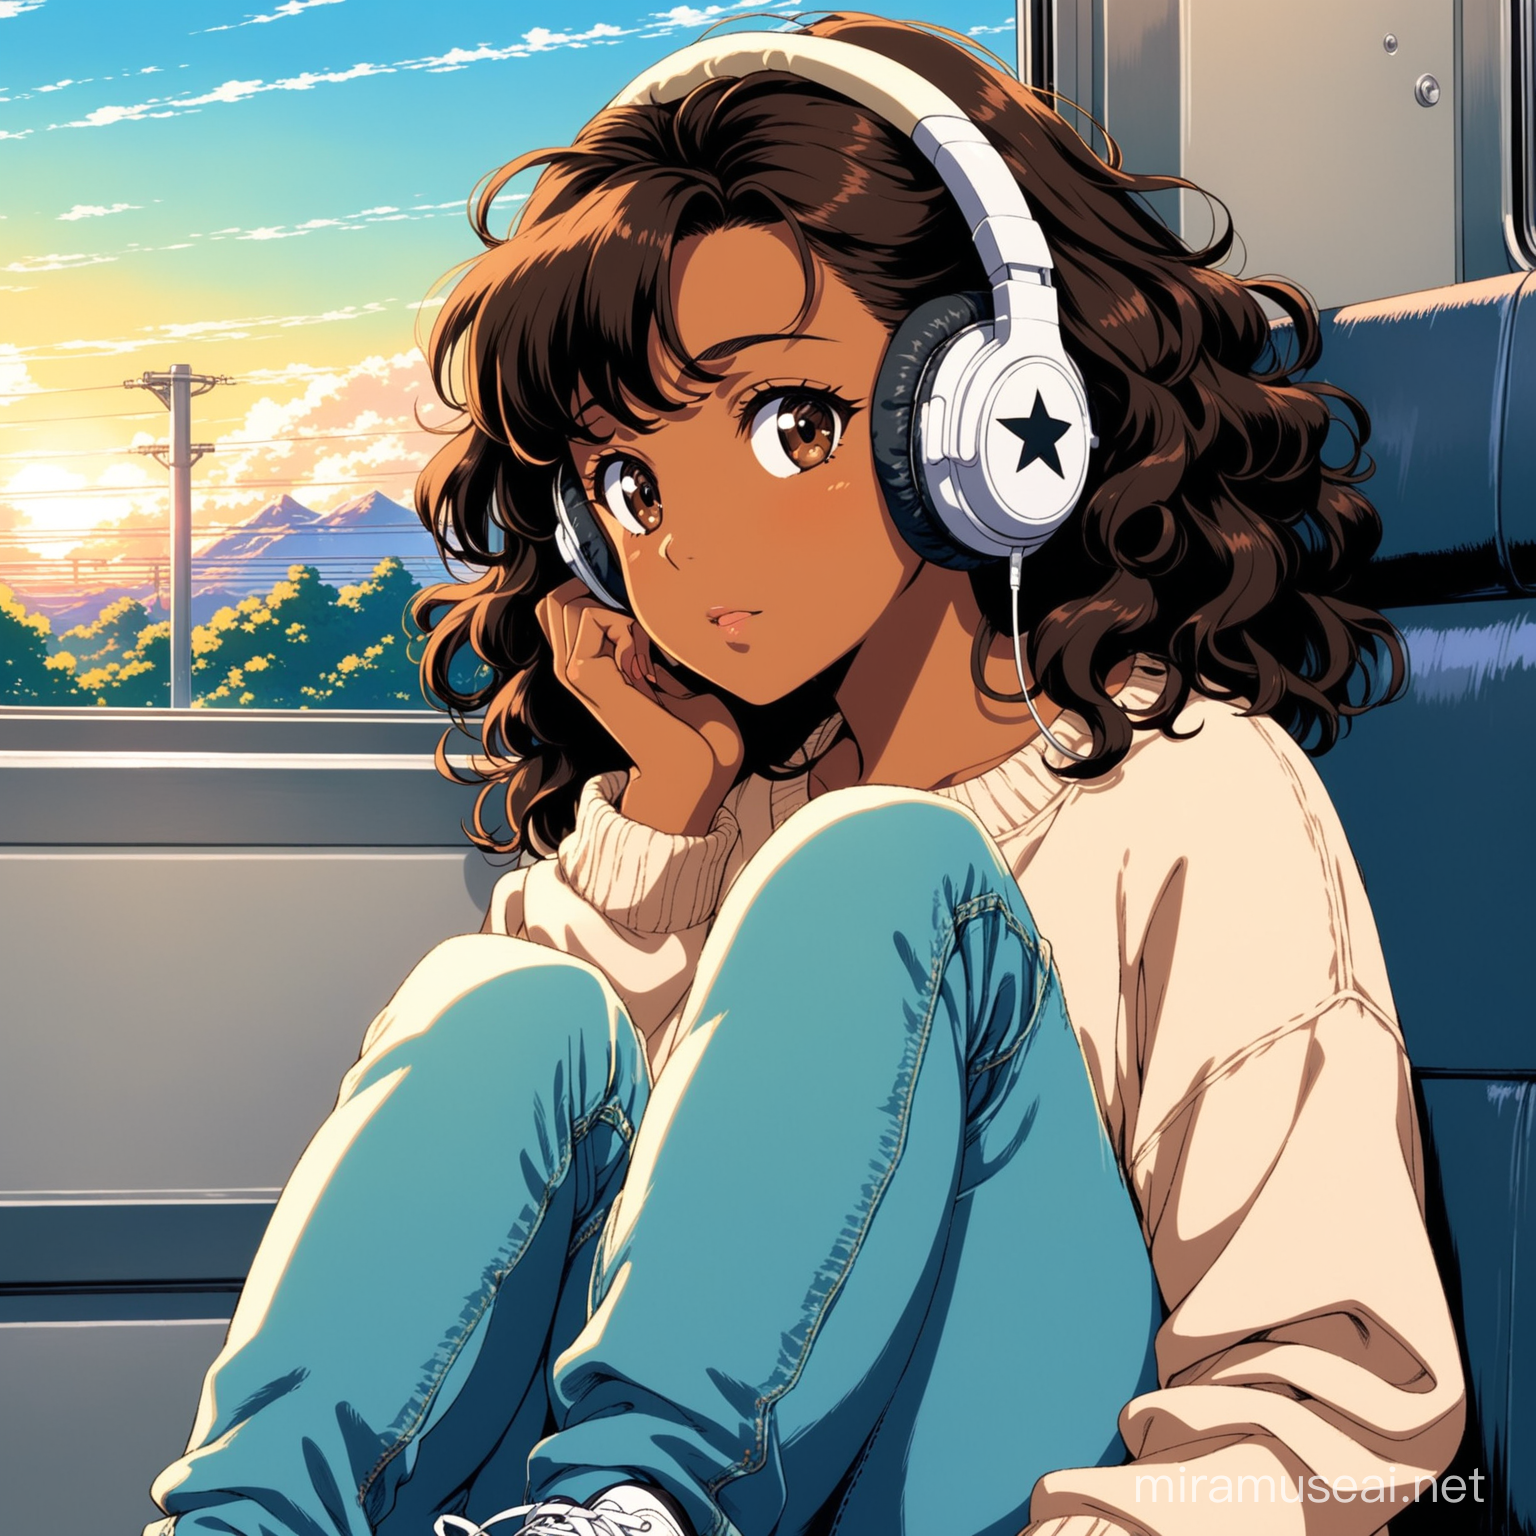 Anime Girl with Brown Skin Enjoying Train Ride in Comfy Attire